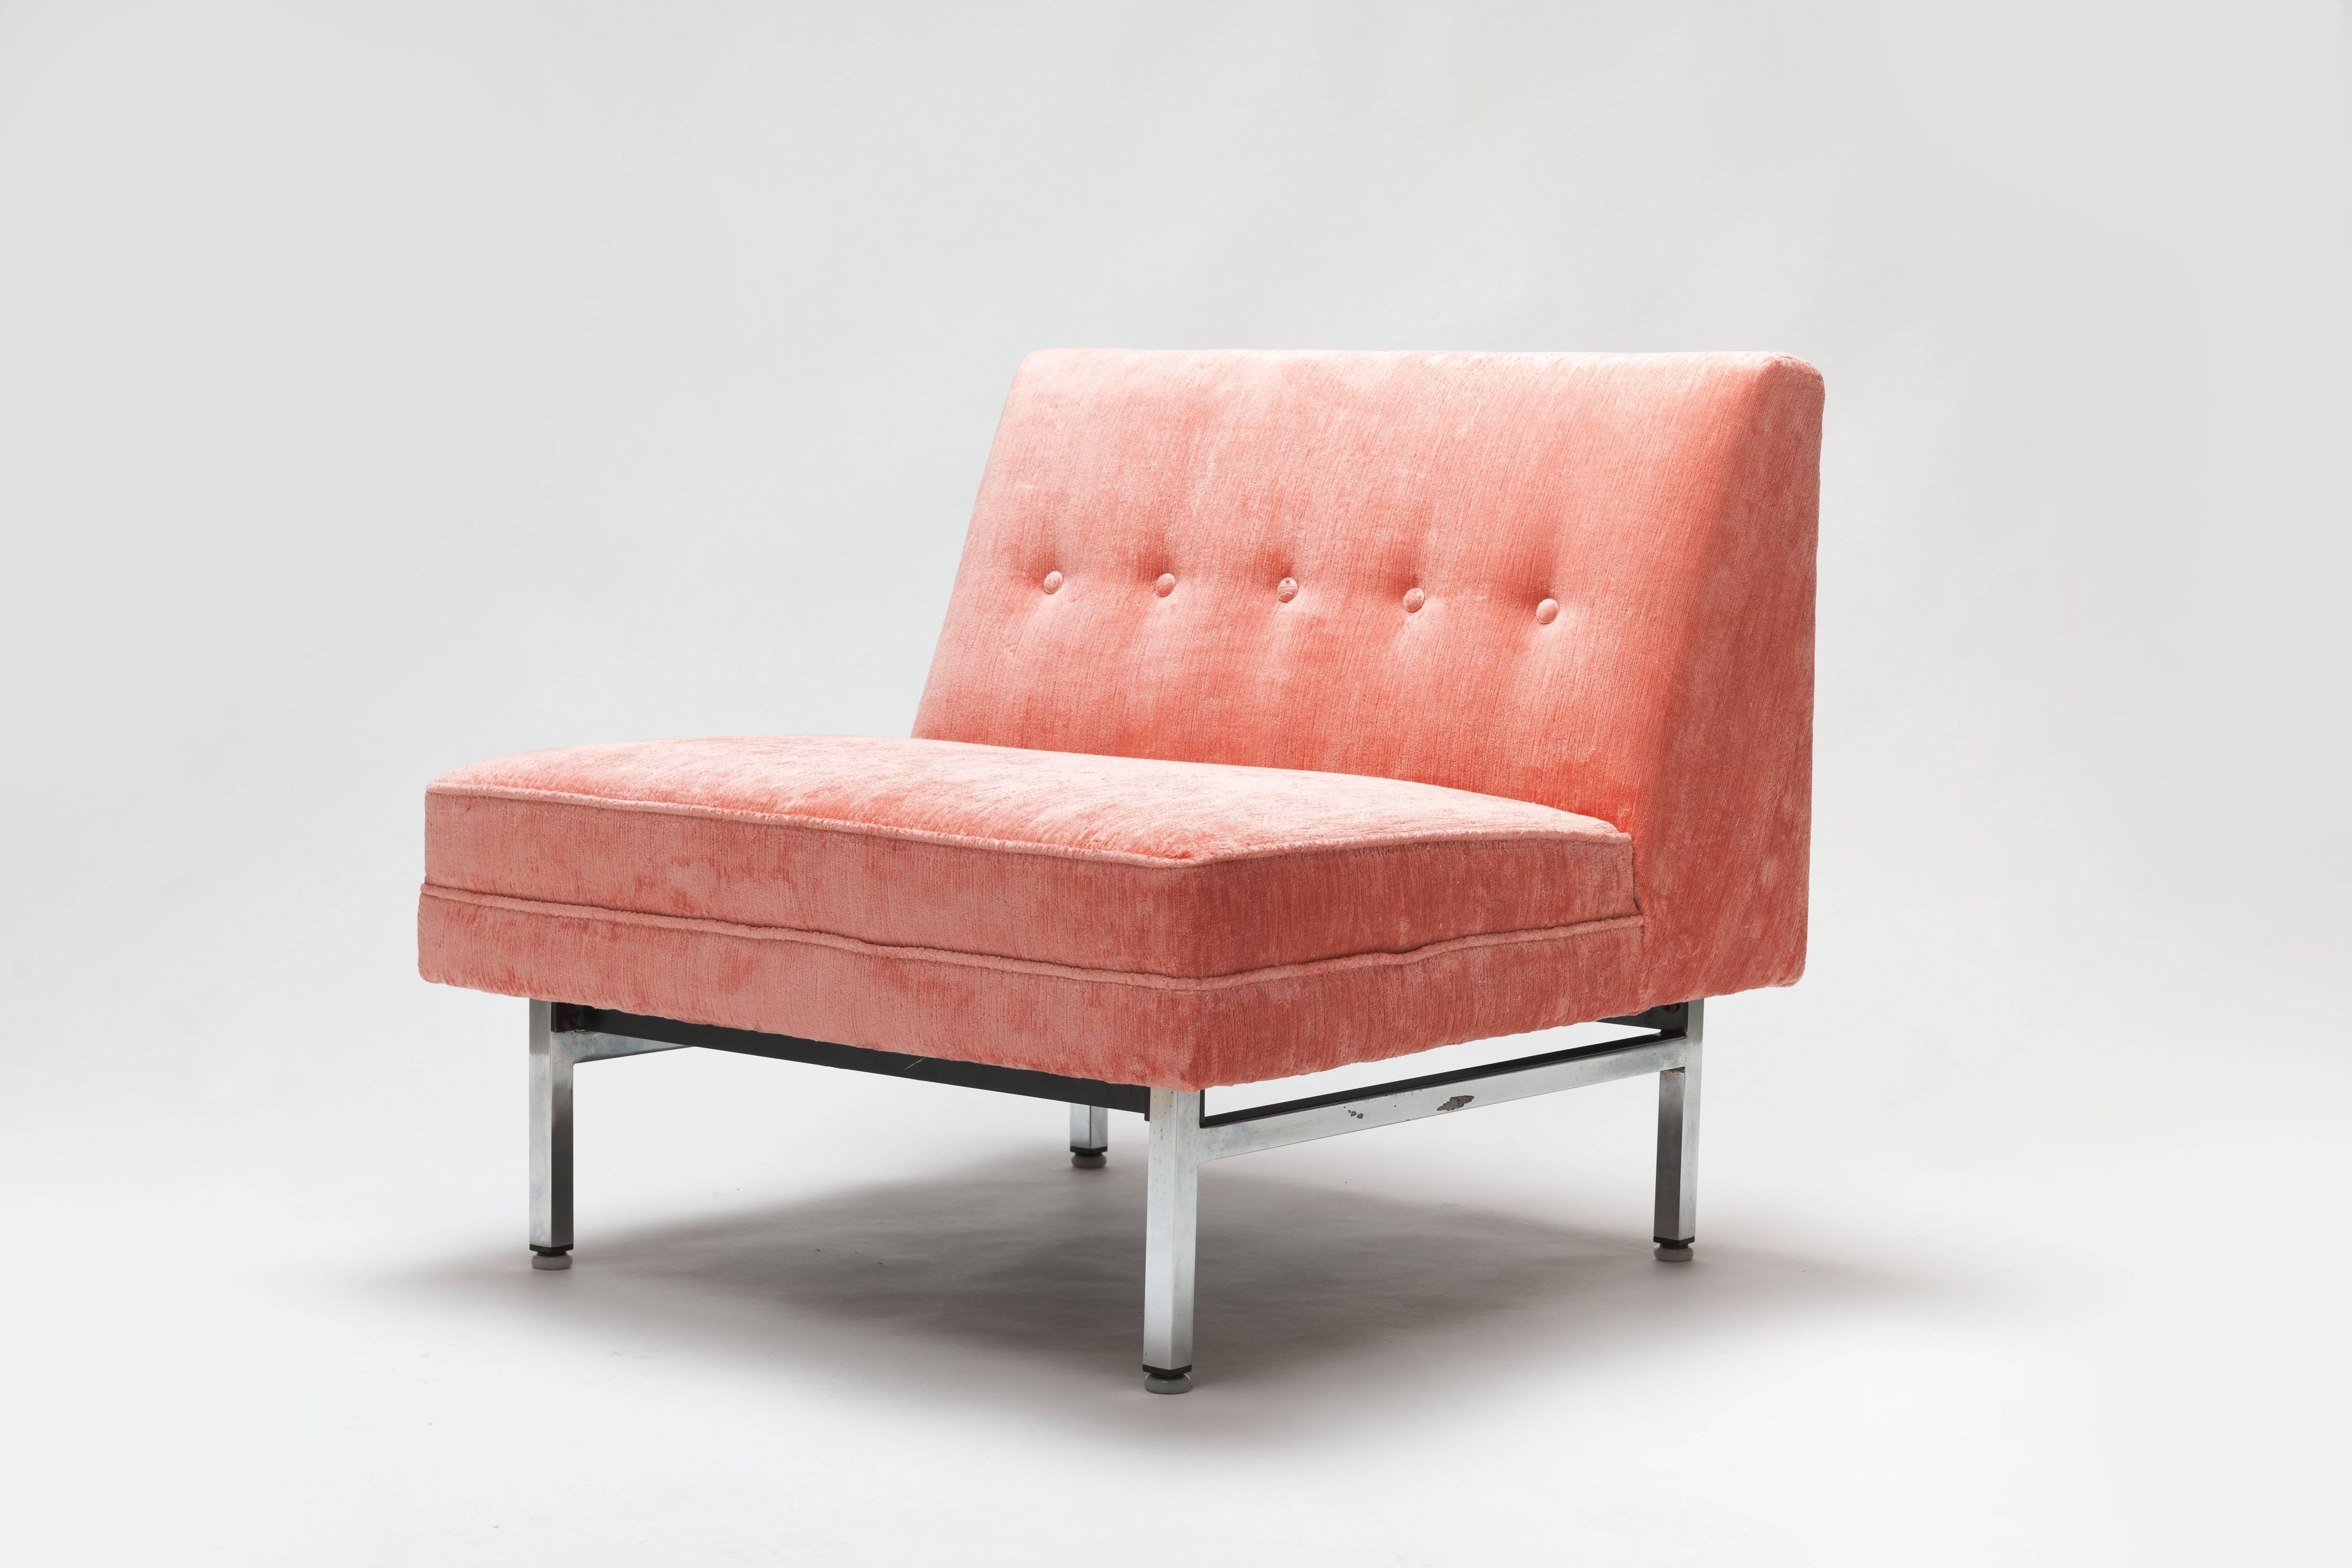 1956 modular seating series slipper chair by George Nelson made by Herman Miller. Completely restored in a very beautiful and exclusive (and expensive) French fabric in a very distinct pink color.
The color changes by the way the light catches the